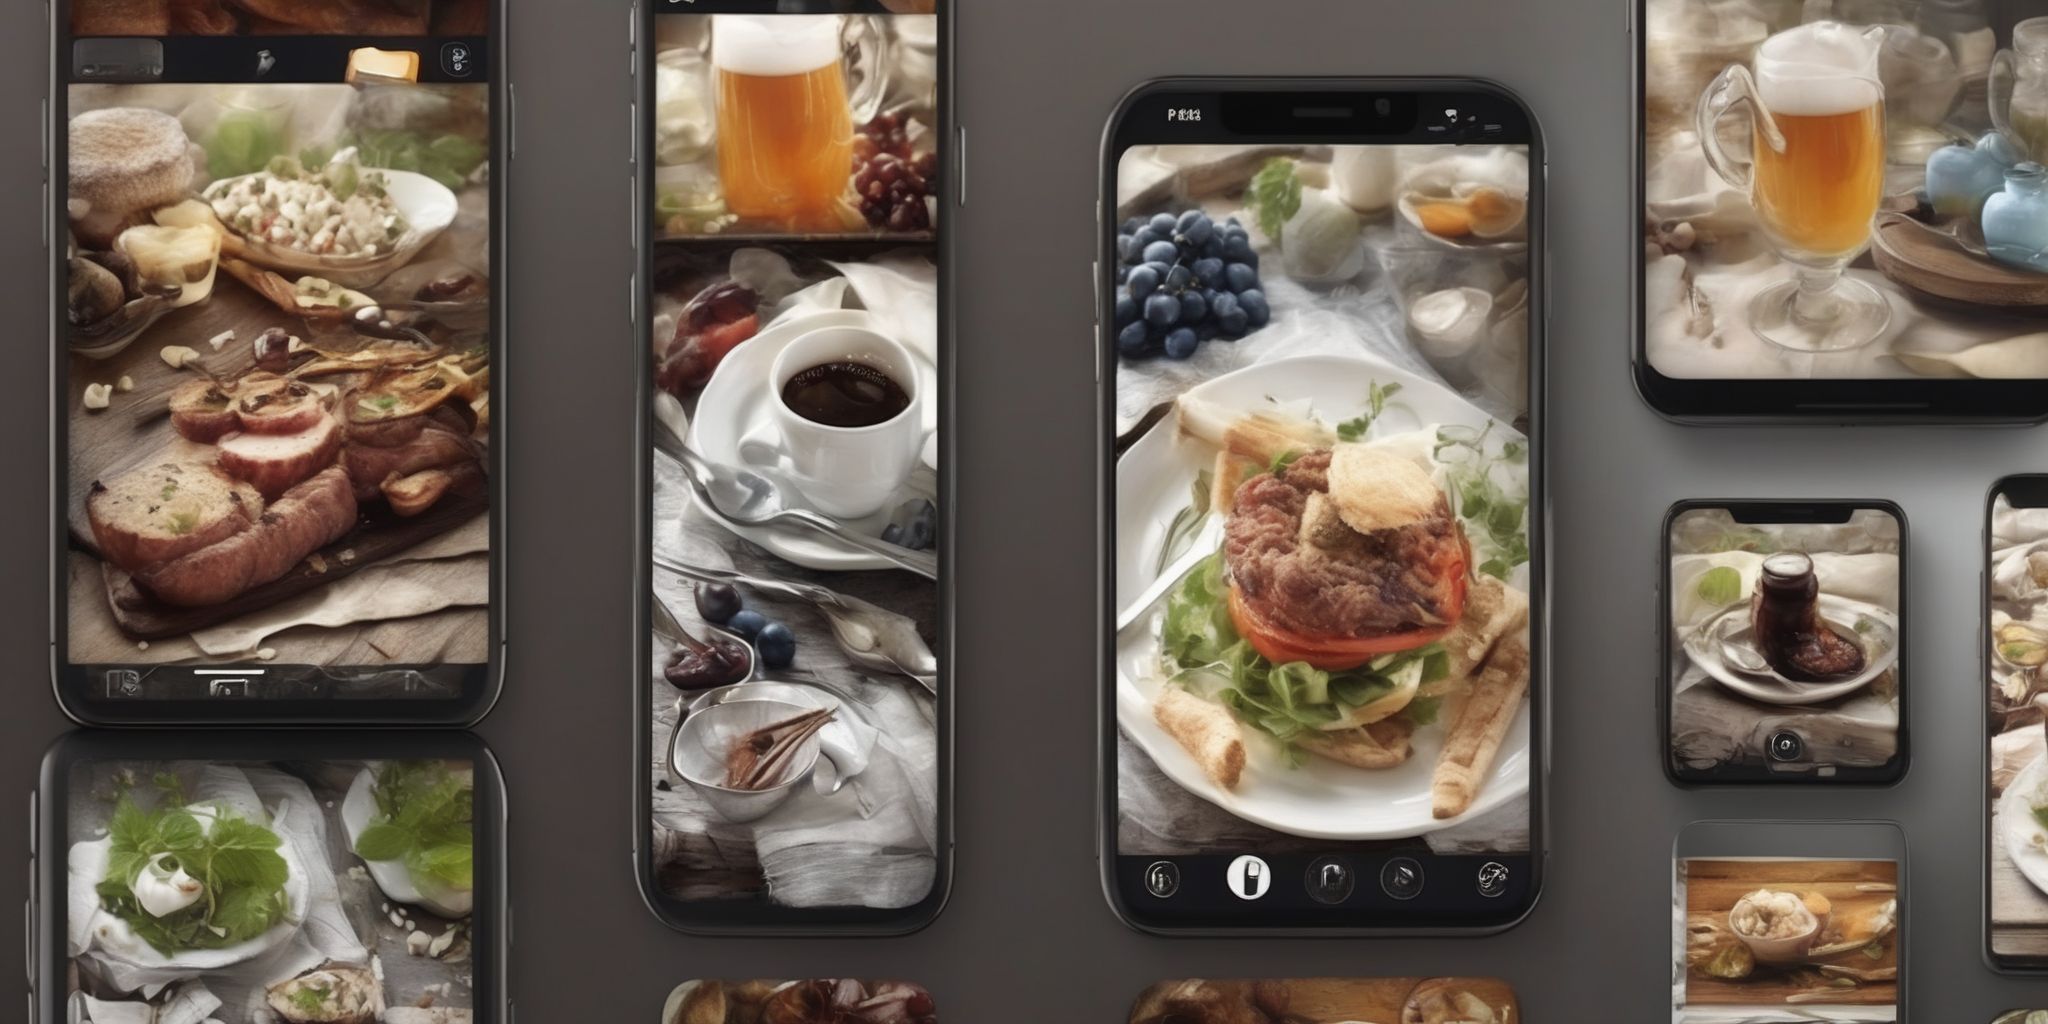 Apps  in realistic, photographic style